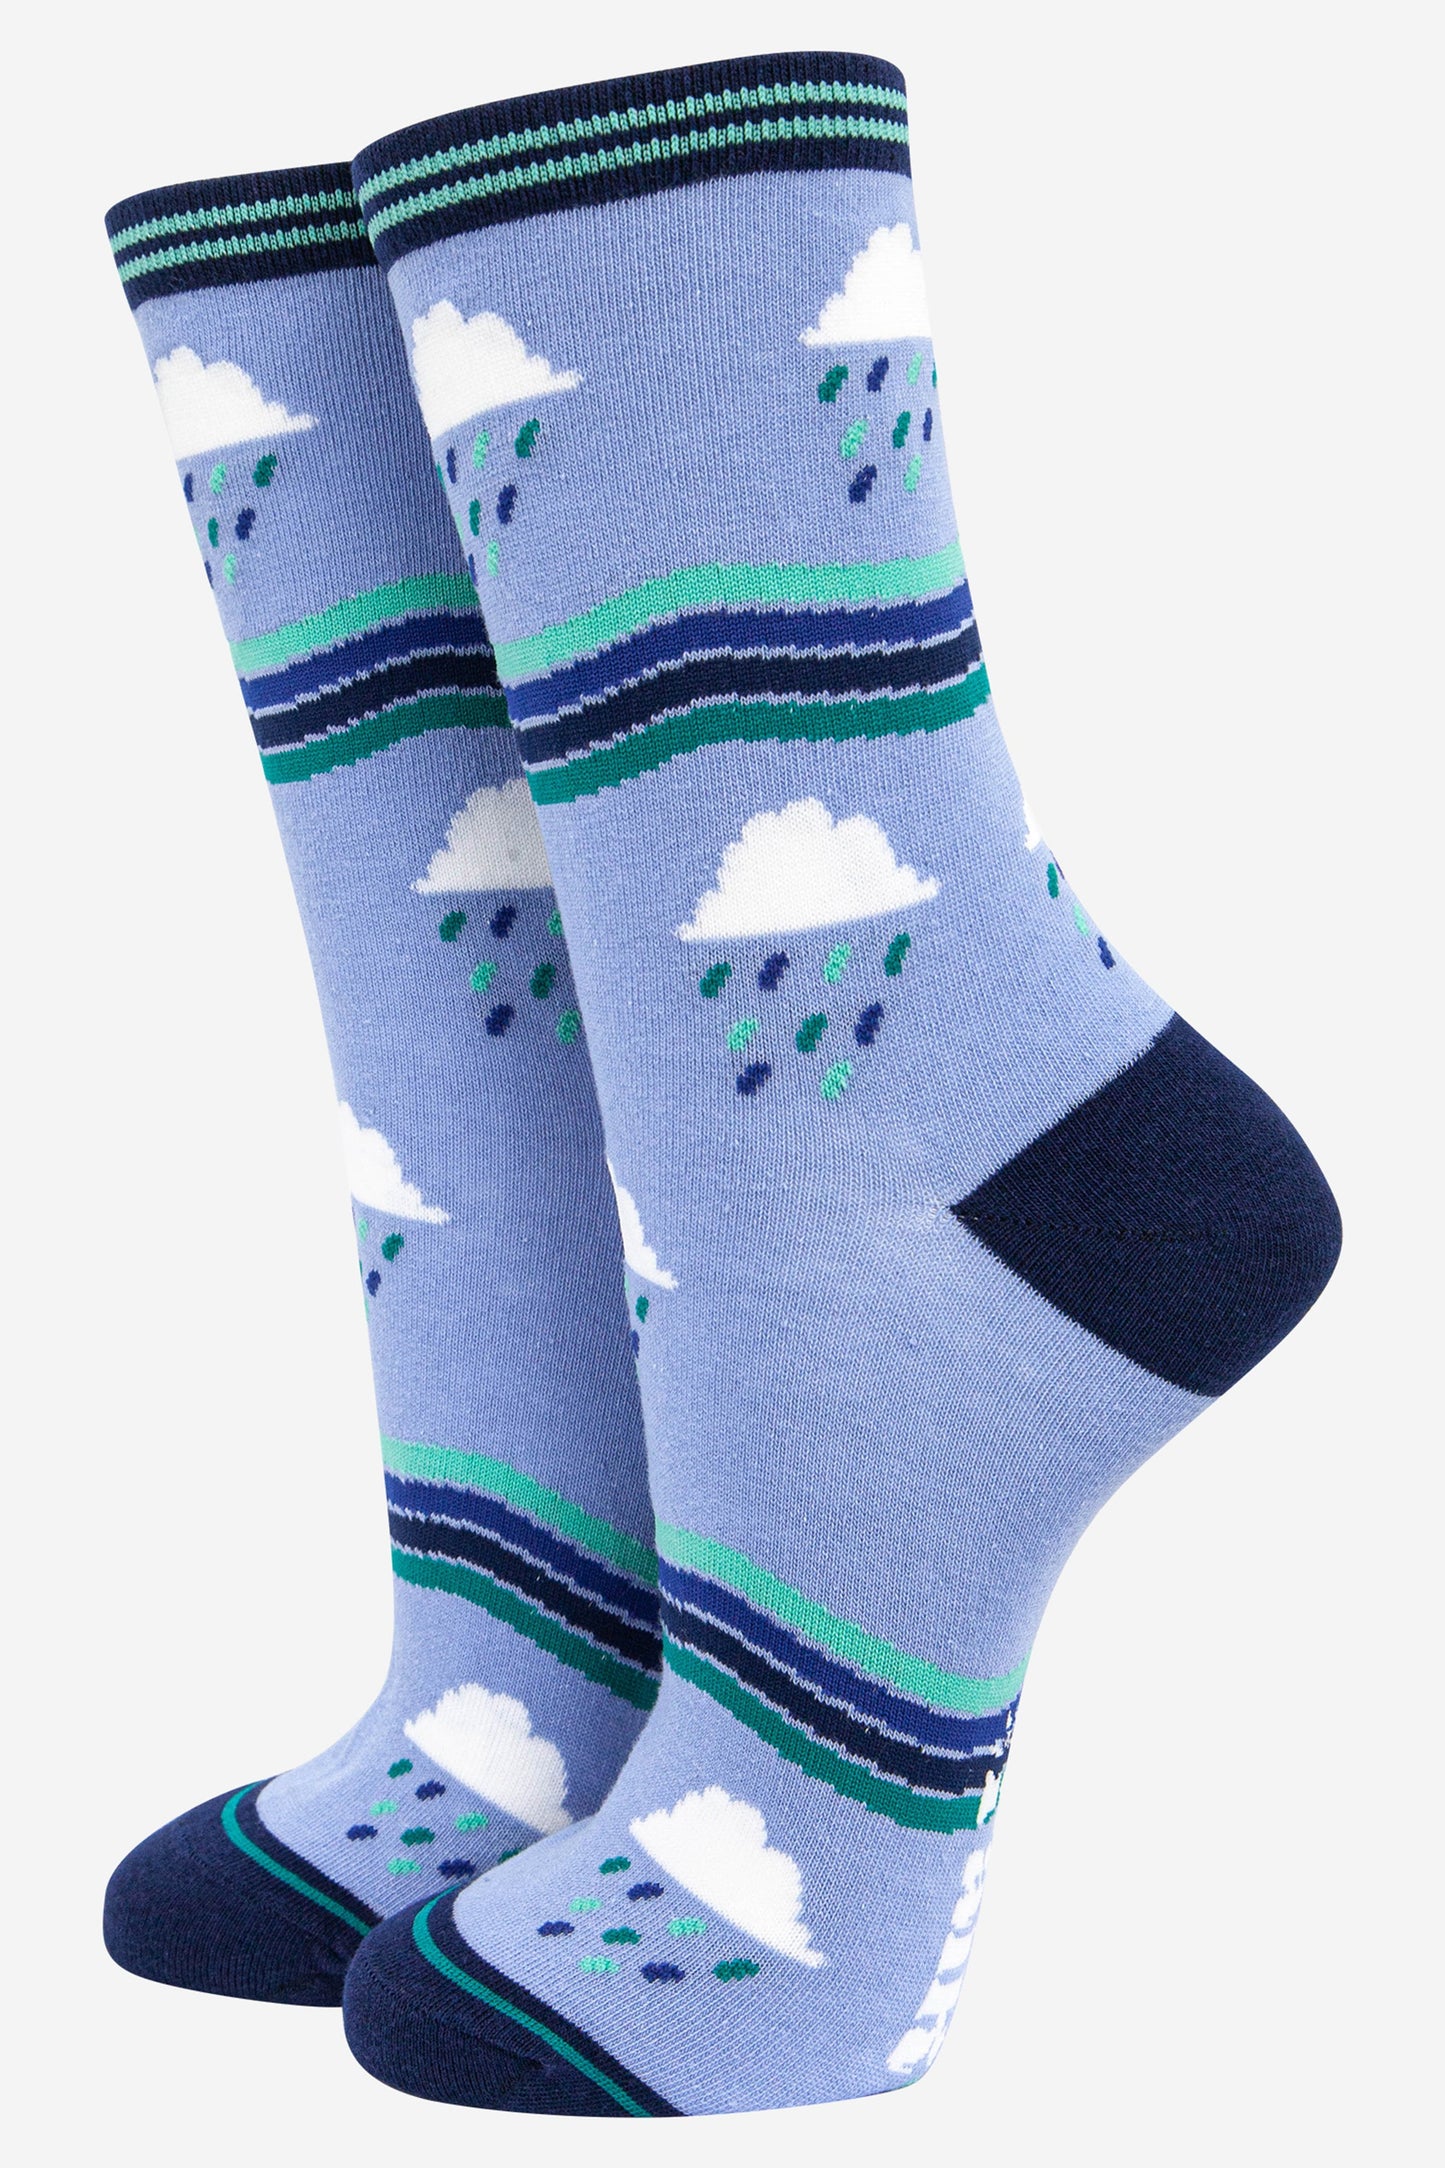 blue bamboo socks featuring rain clouds and wavy stipes